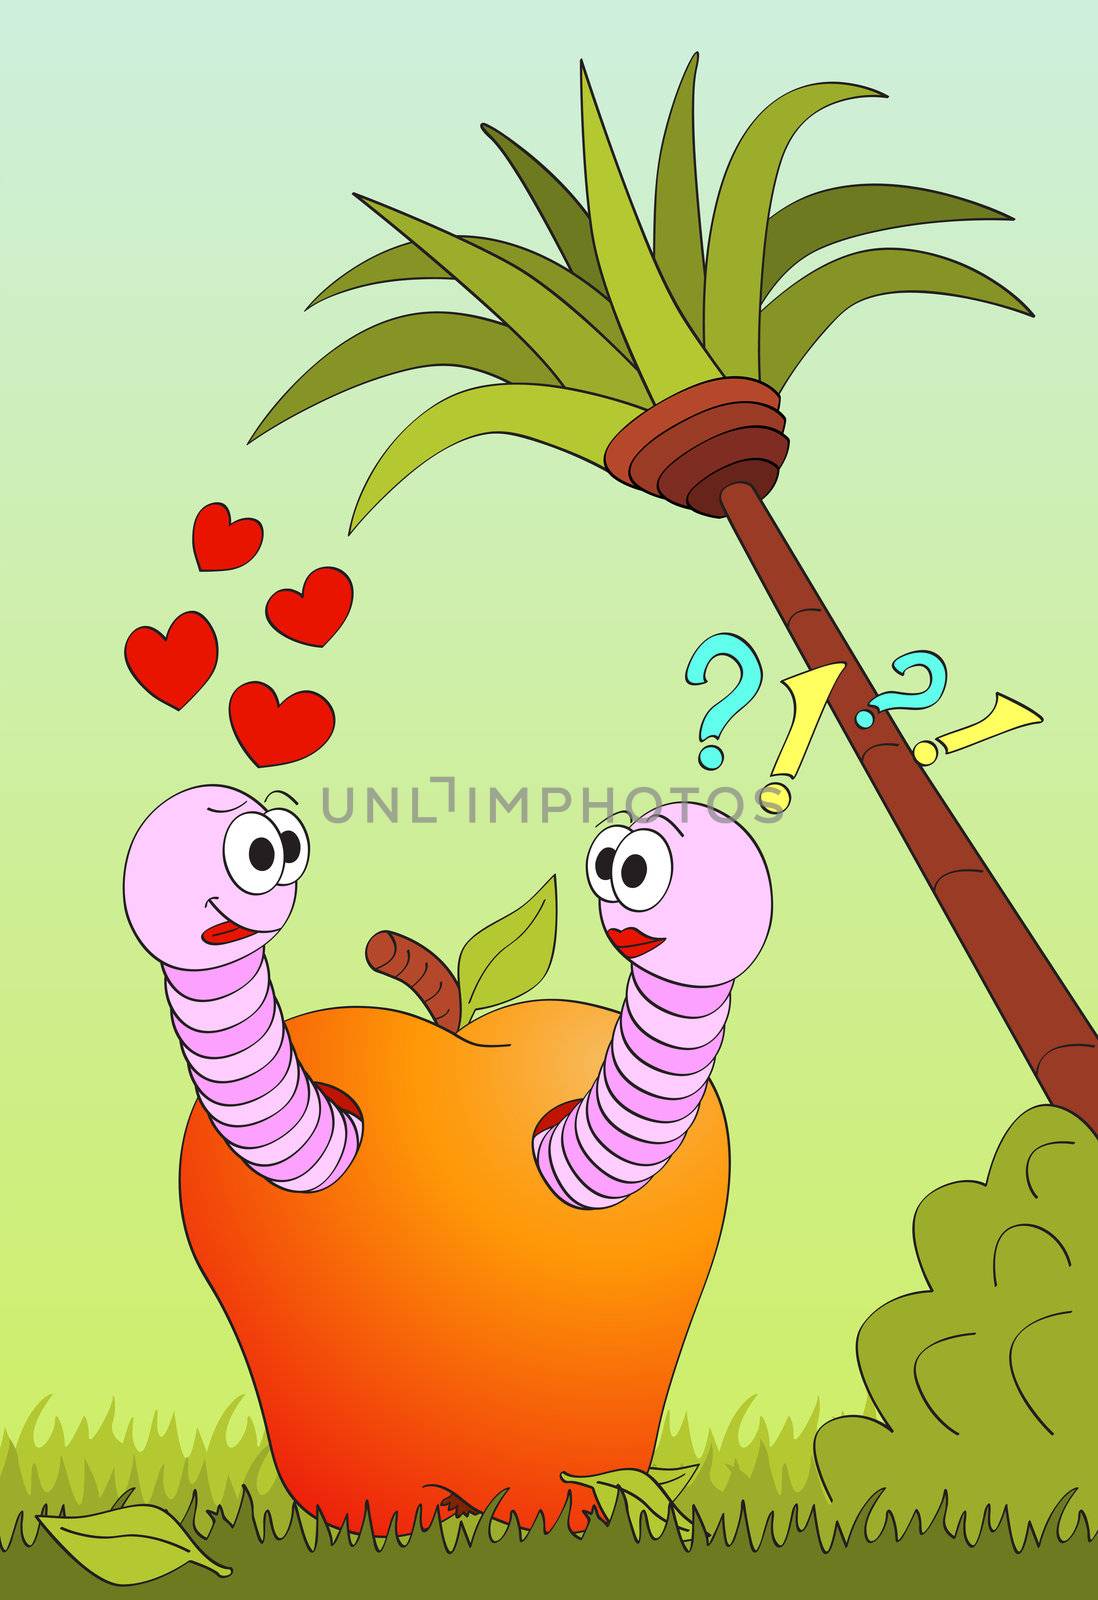 Worms in love in apple vector illustration